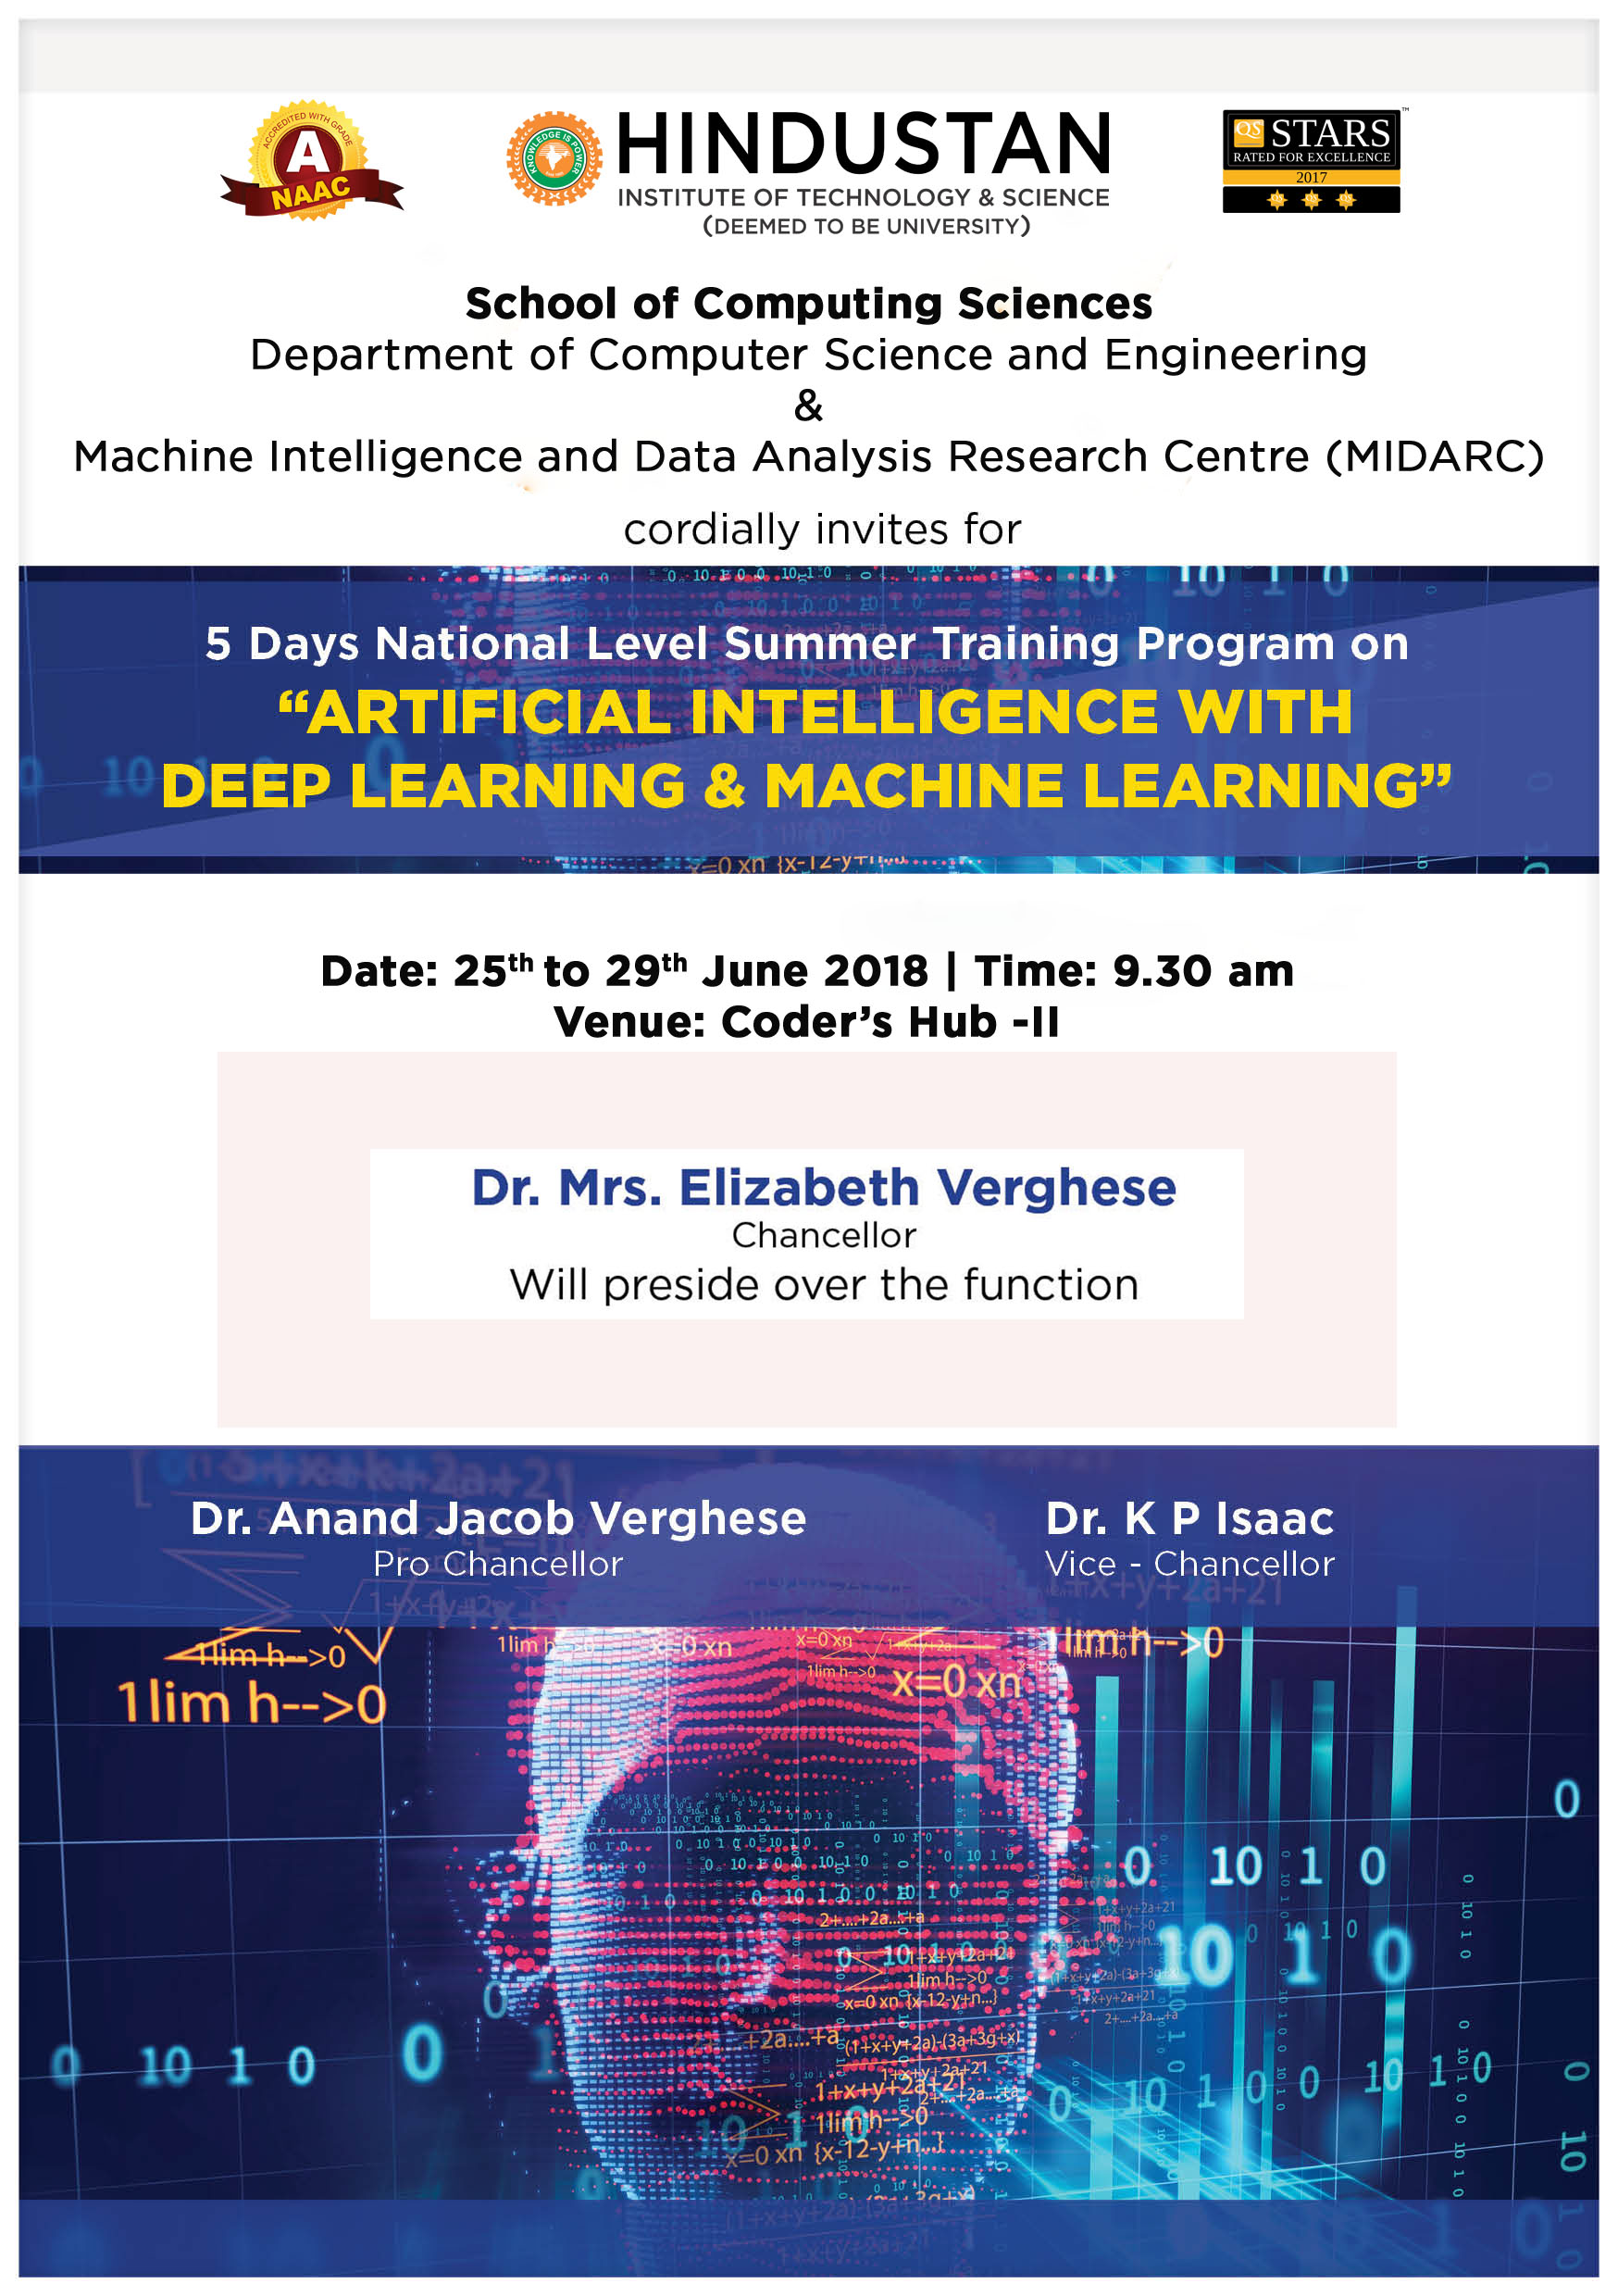 5 Days National Level Summer Hands-On Training program on ARTIFICIAL INTELLIGENCE WITH DEEP LEARNING & MACHINE LEARNING 